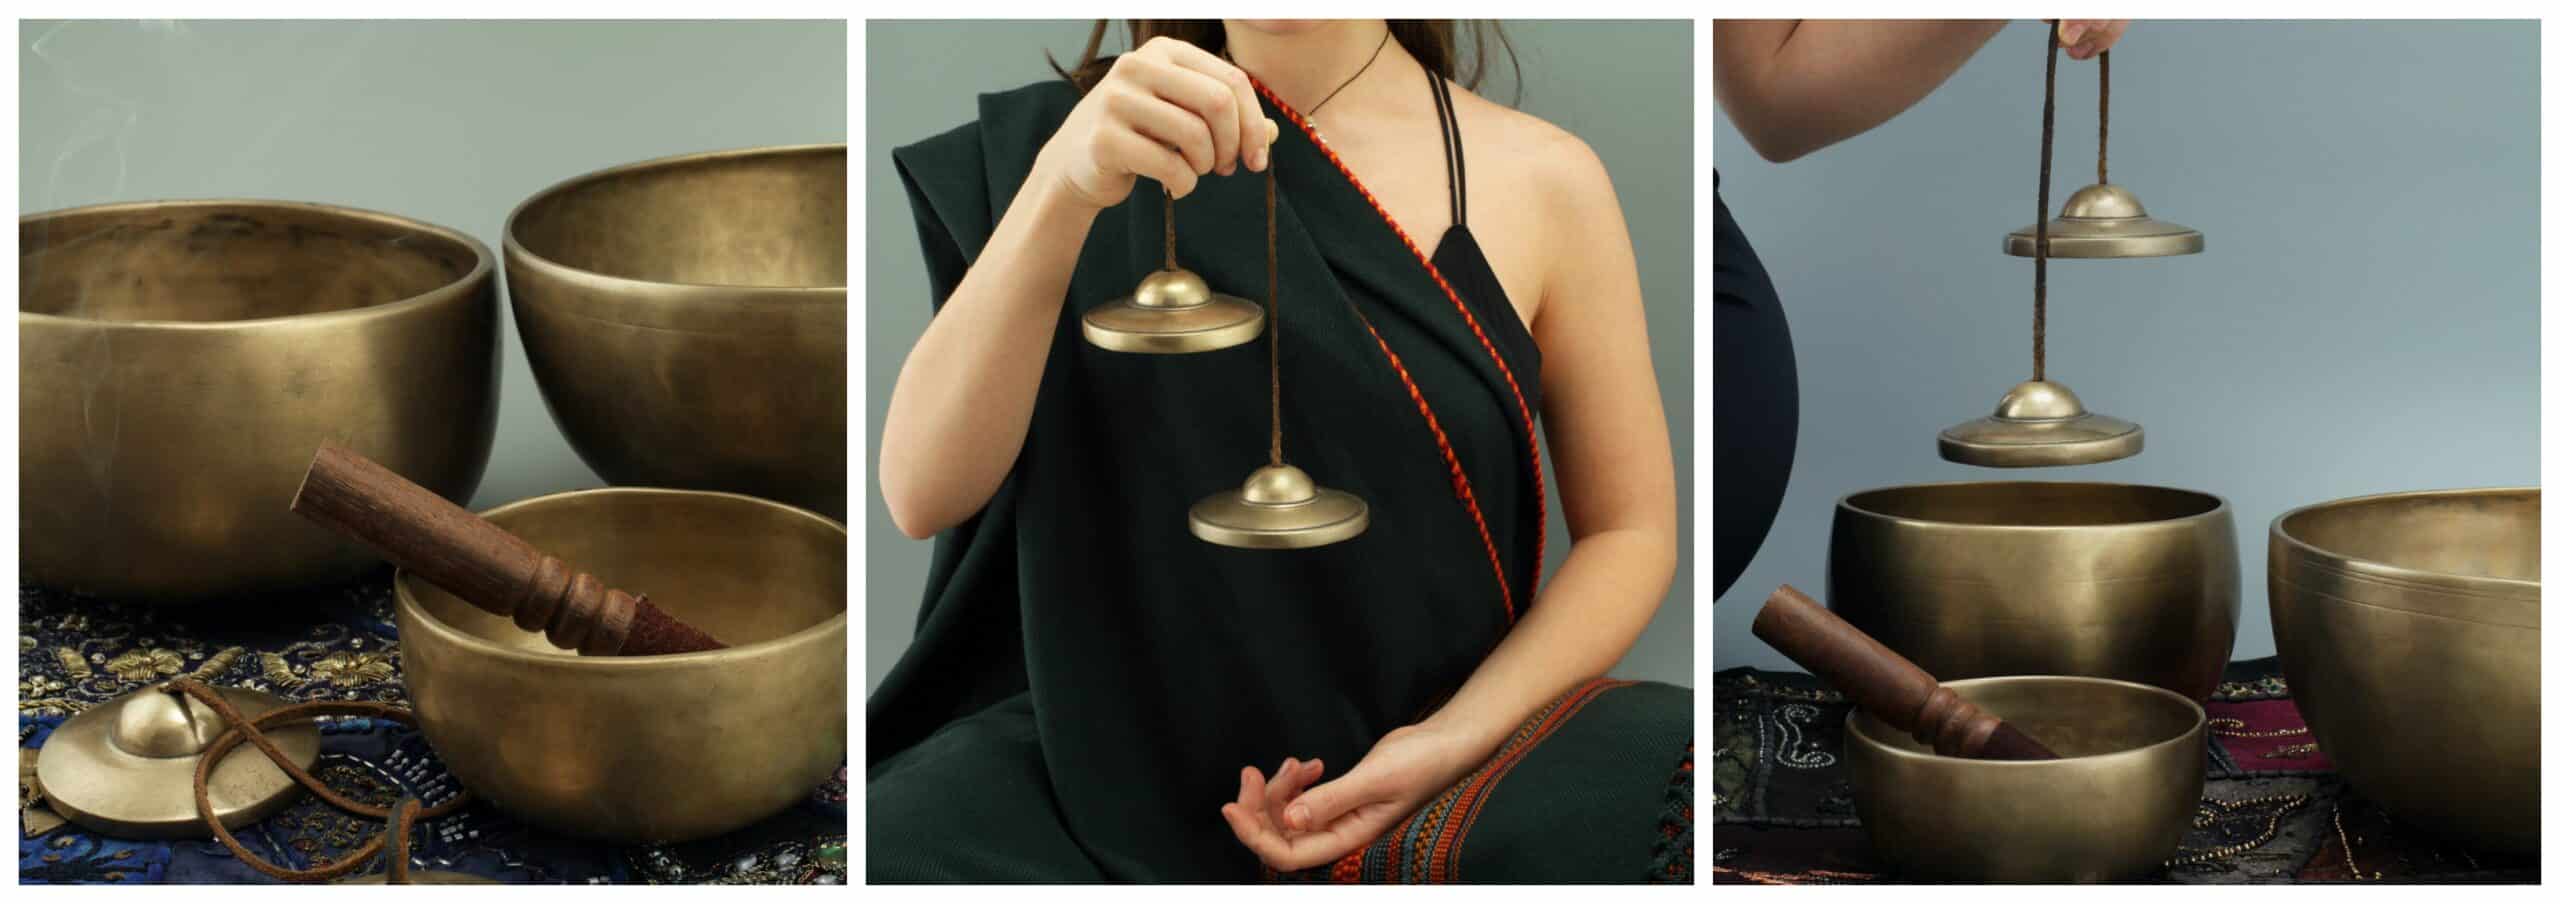 Himalayan sound healing instruments, handmade in Nepal. Perfect for mindfulness, meditation and therapy!